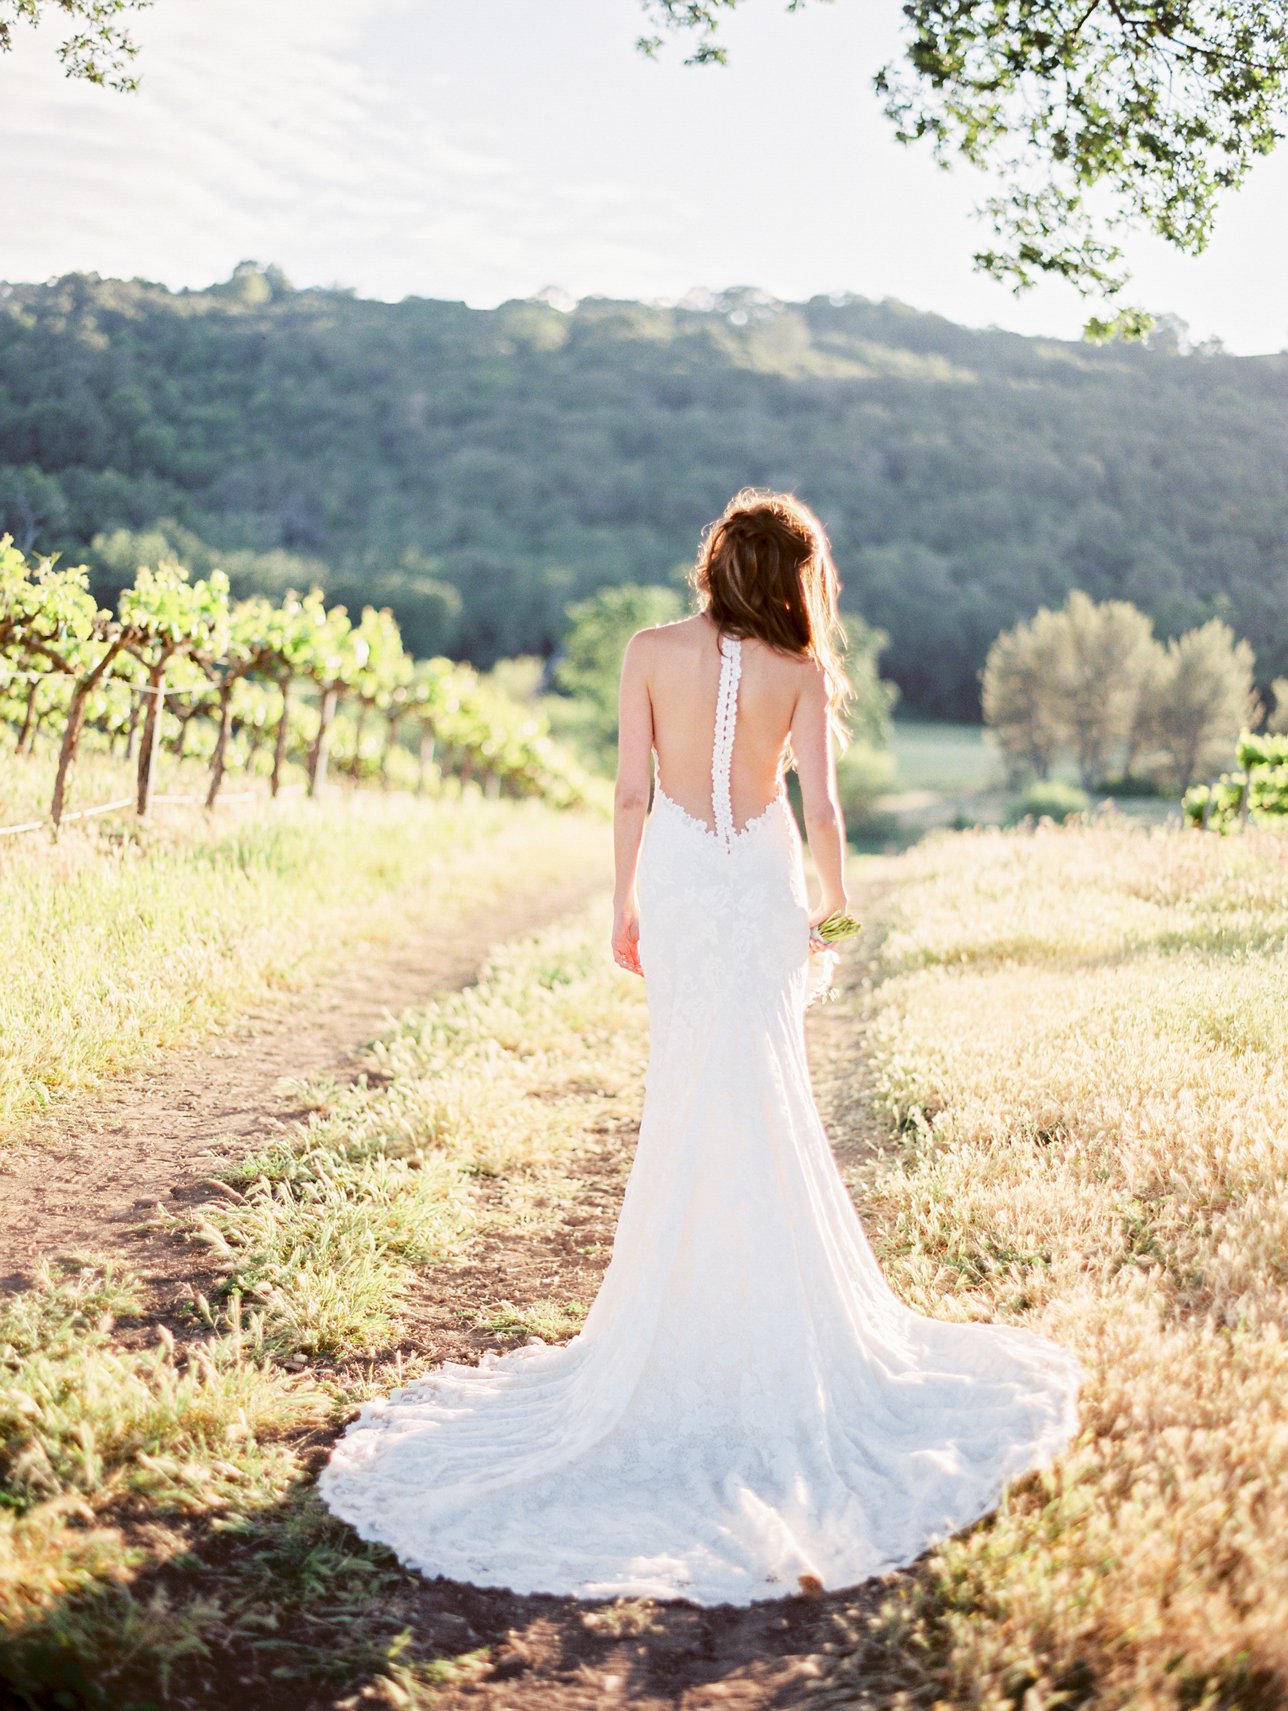 HammerSky Vineyards wedding photos - Paso Robles Wedding Photographer | Rachel Solomon Photography_9063